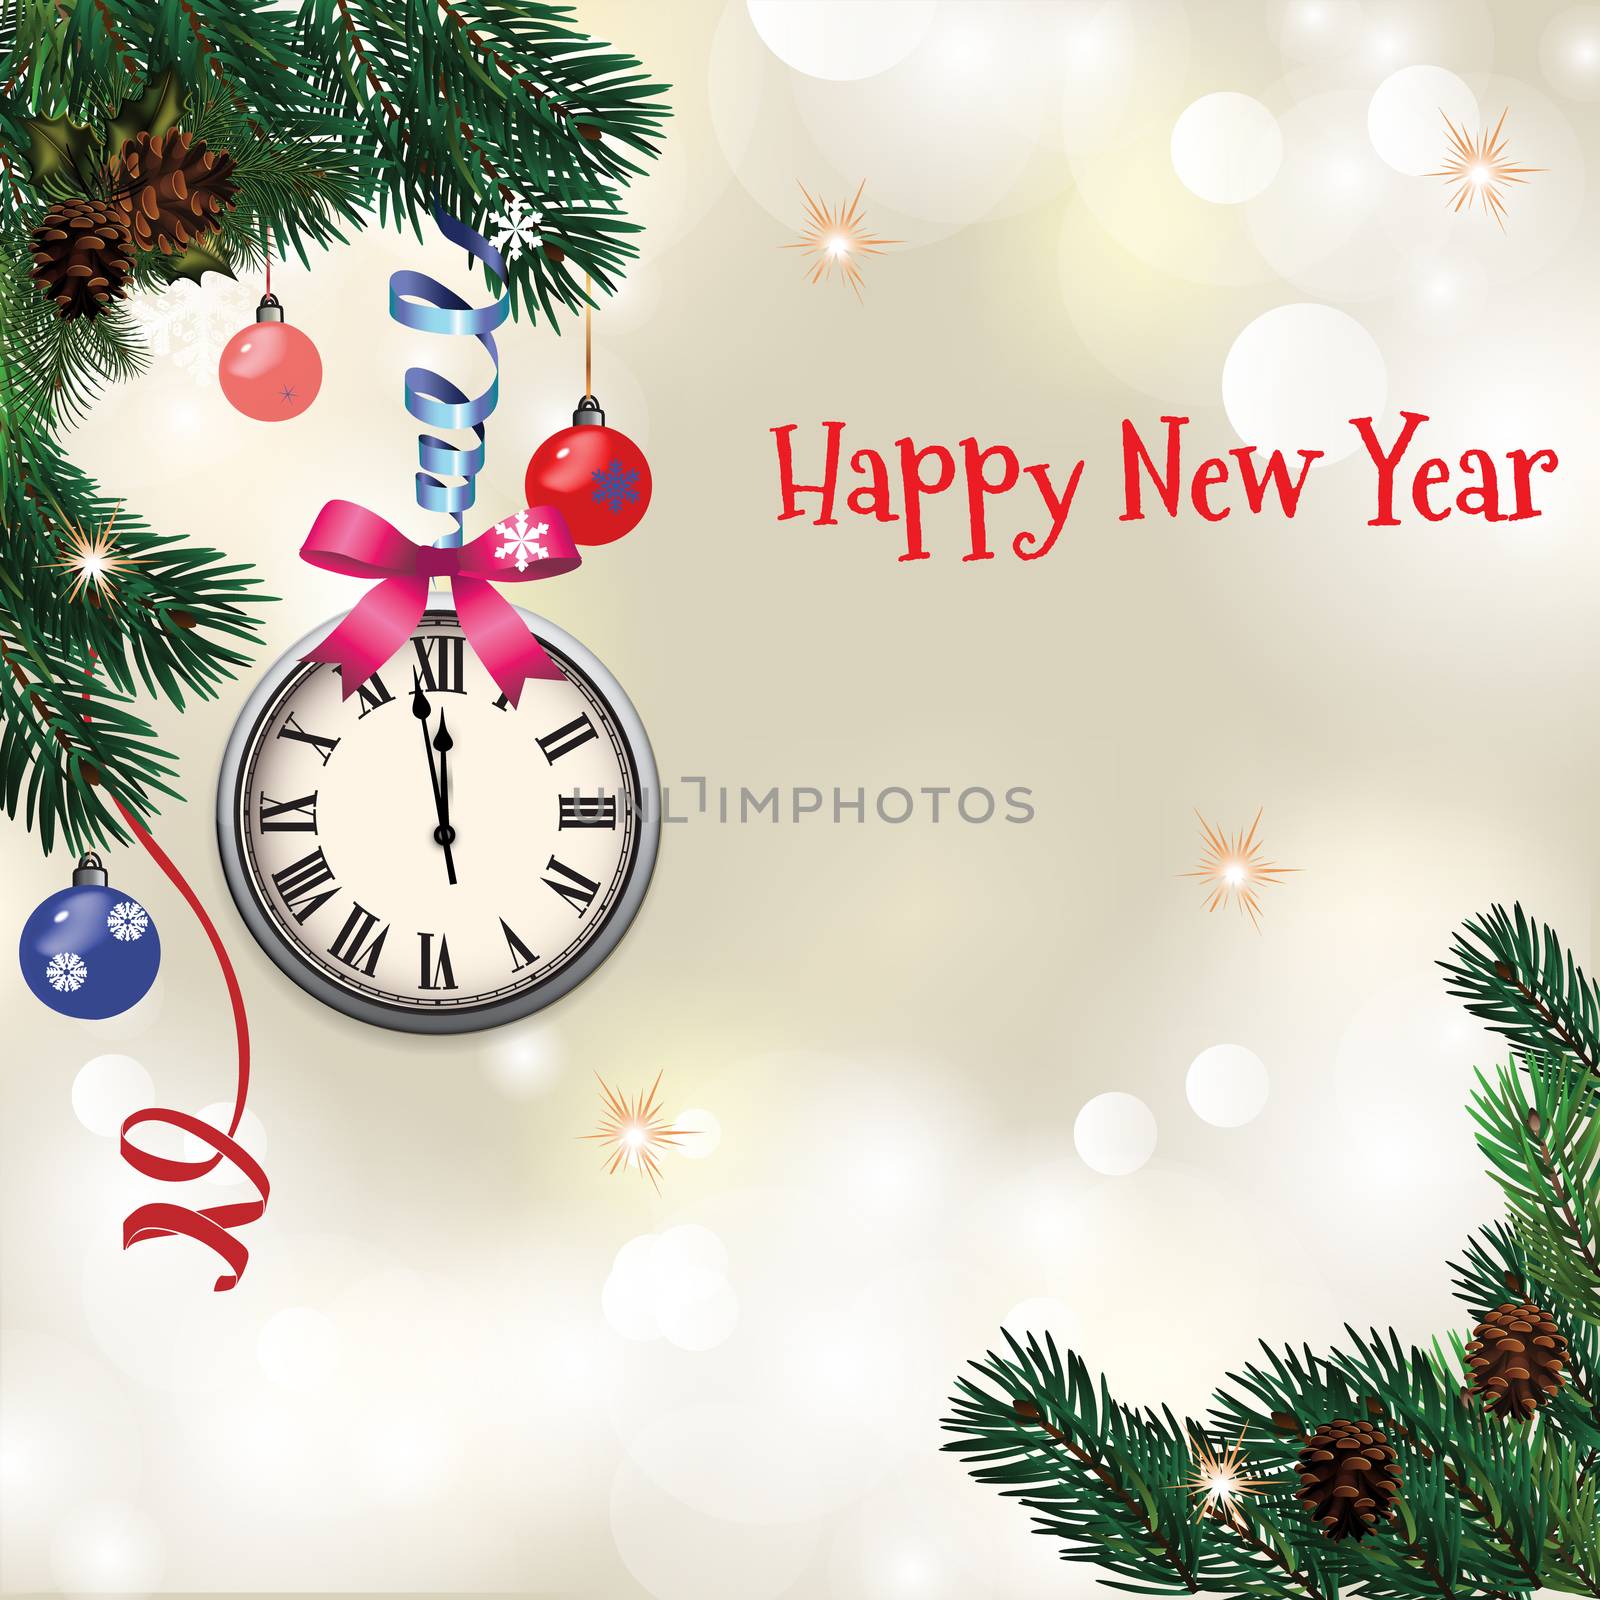 Christmas and New Year greeting card with fir branches, a clock and a sparkler. With congratulatory text